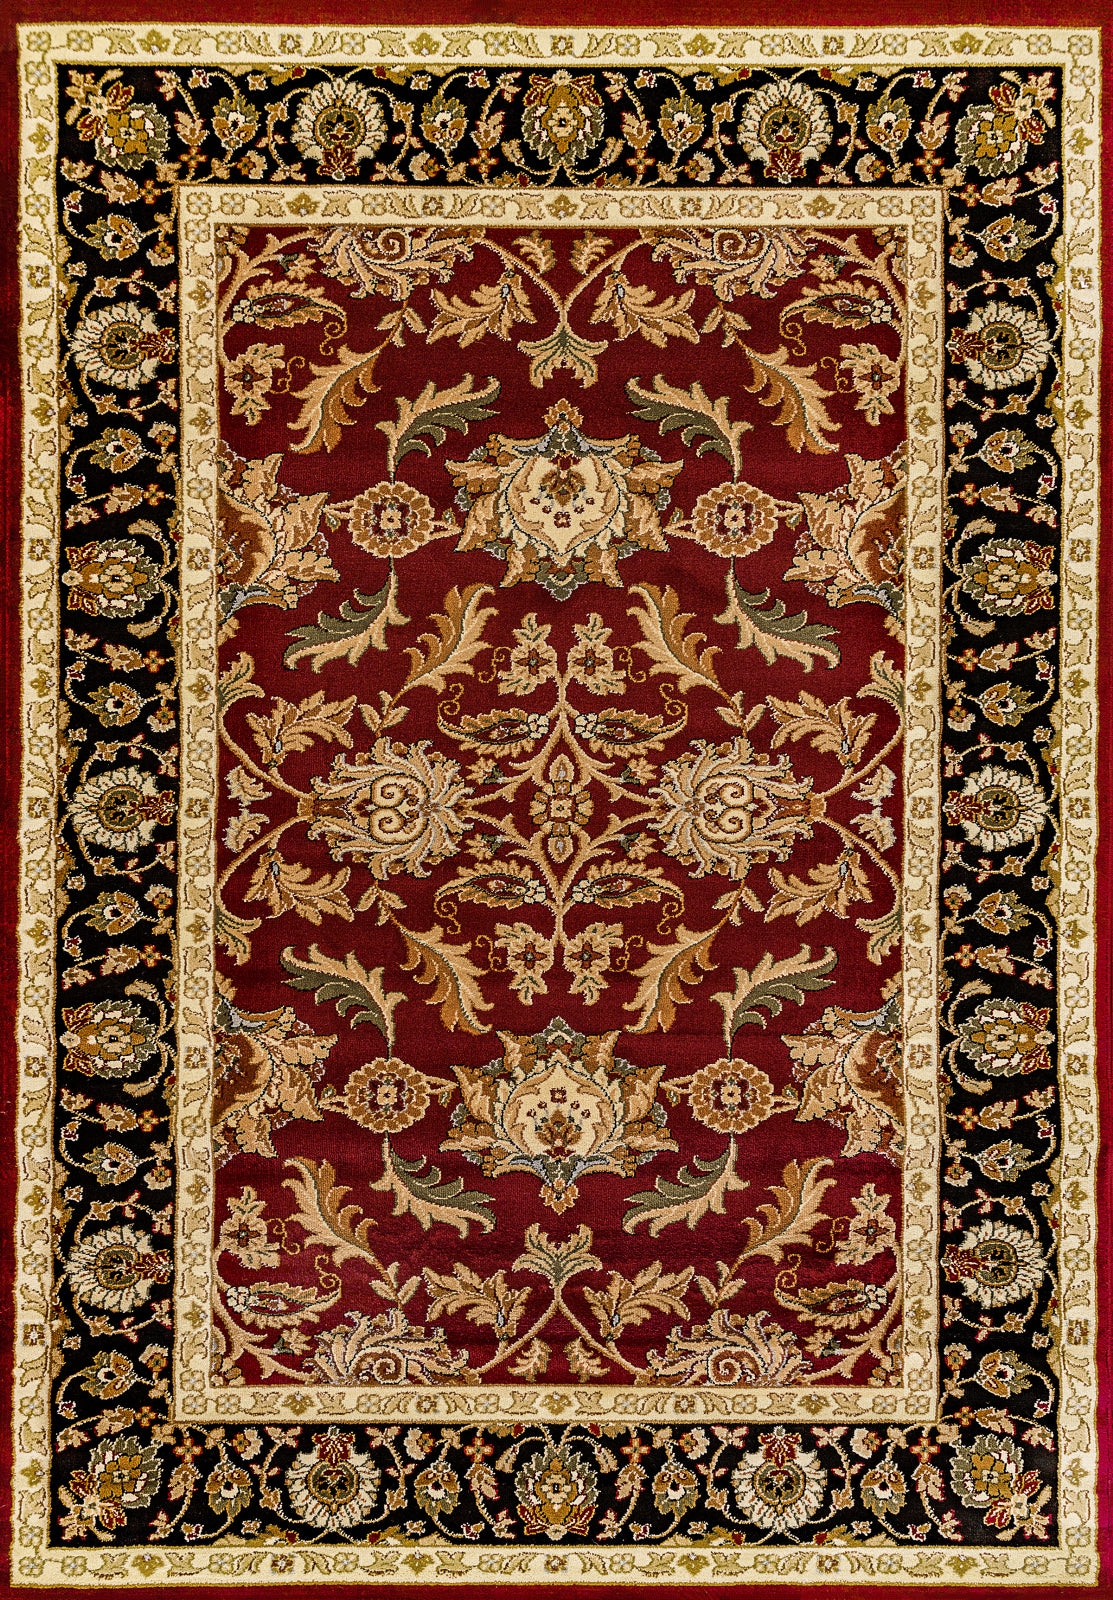 Dynamic Rugs Yazd 1744 Red Area Rug main image